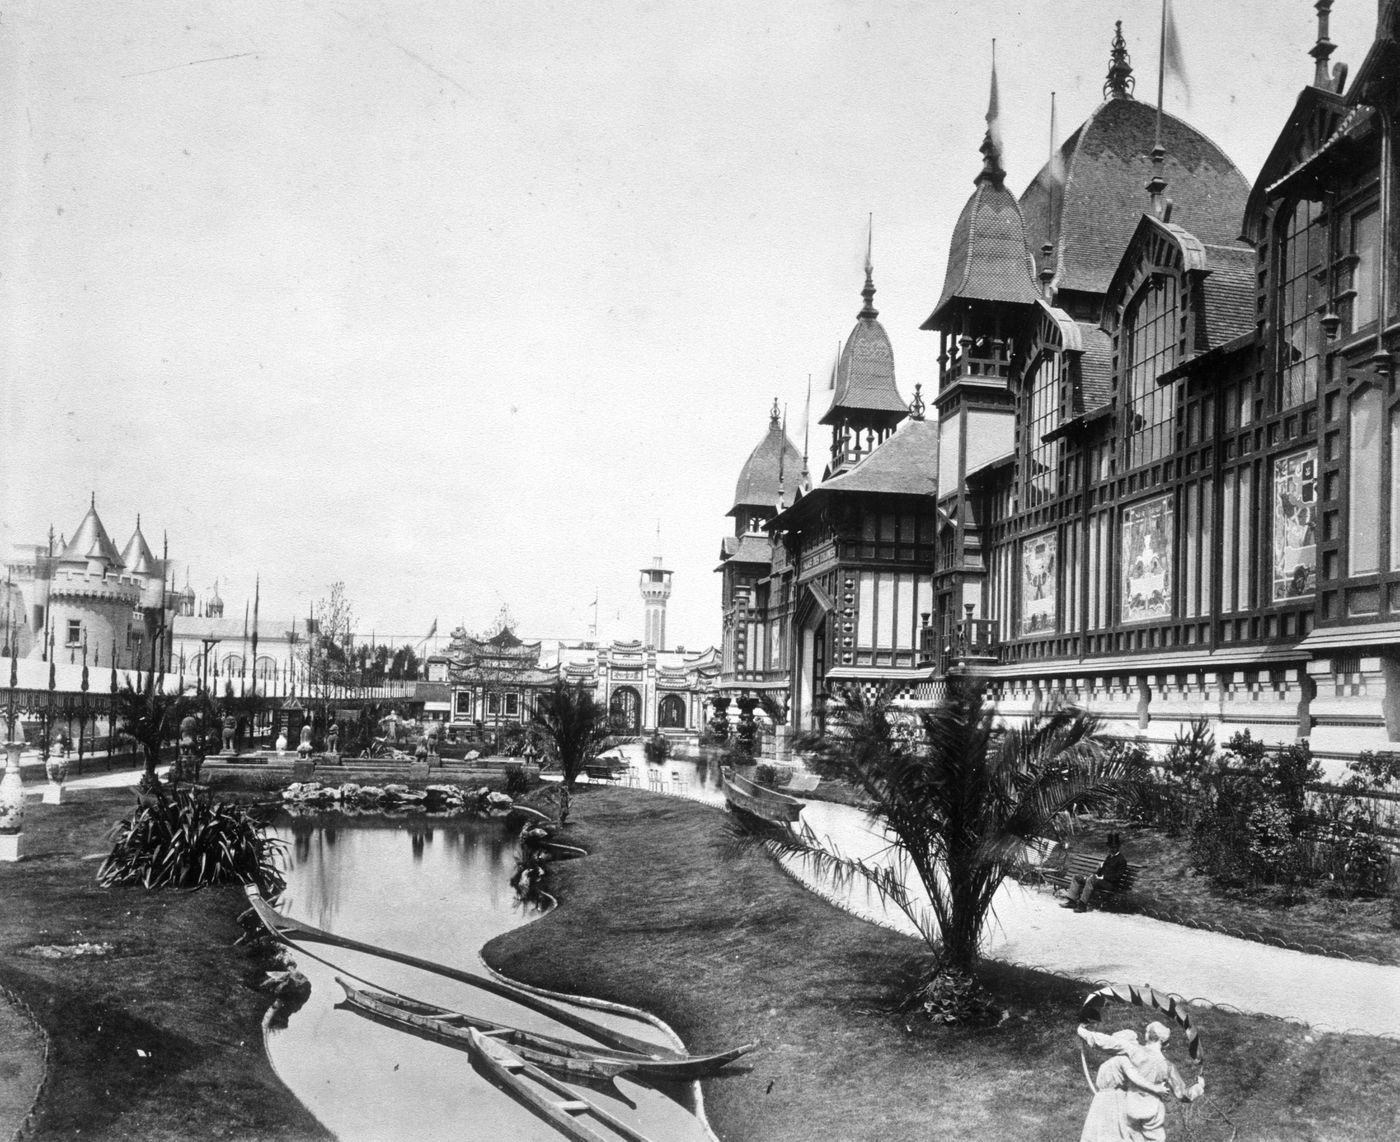 View of pavilions at the Exposition universelle de 1889, Paris, France, with the "Palais central des Colonies", designed by Stephen Sauvestre, on the right